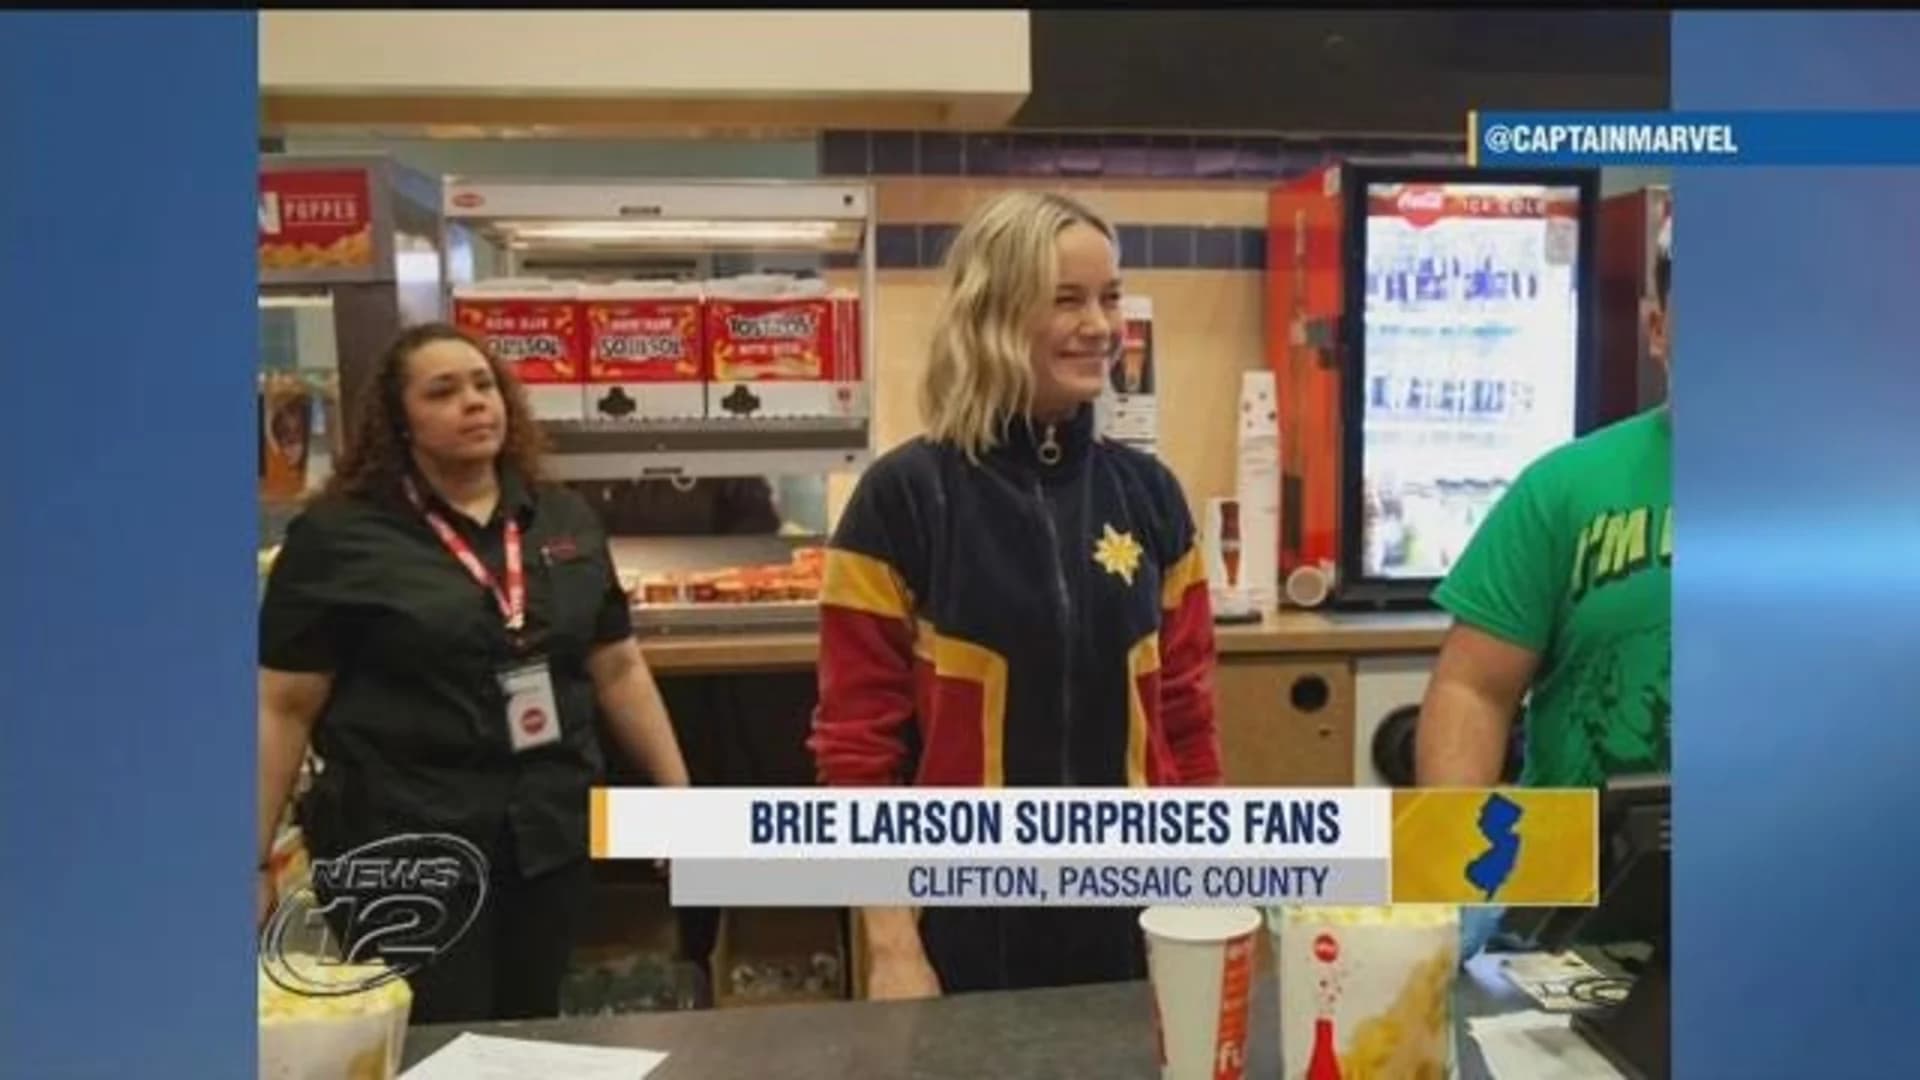 'Captain Marvel' star surprises fans at Clifton movie theater